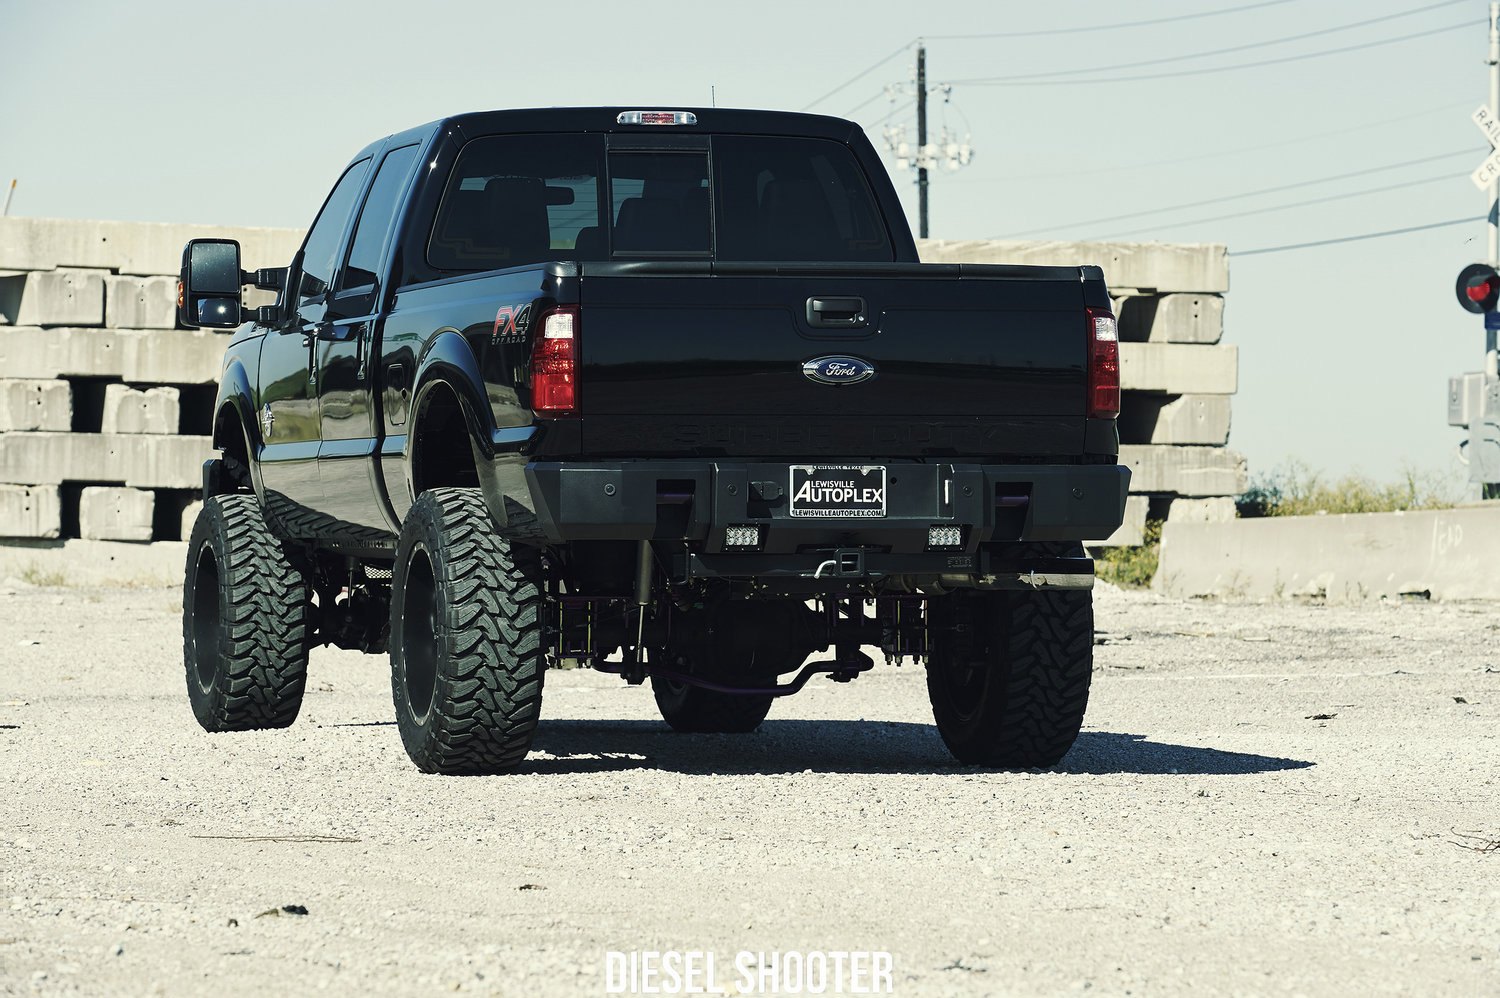 Custom Black Ford F-250 with Suspension Lift Kit - Photo by Diesel Shooter